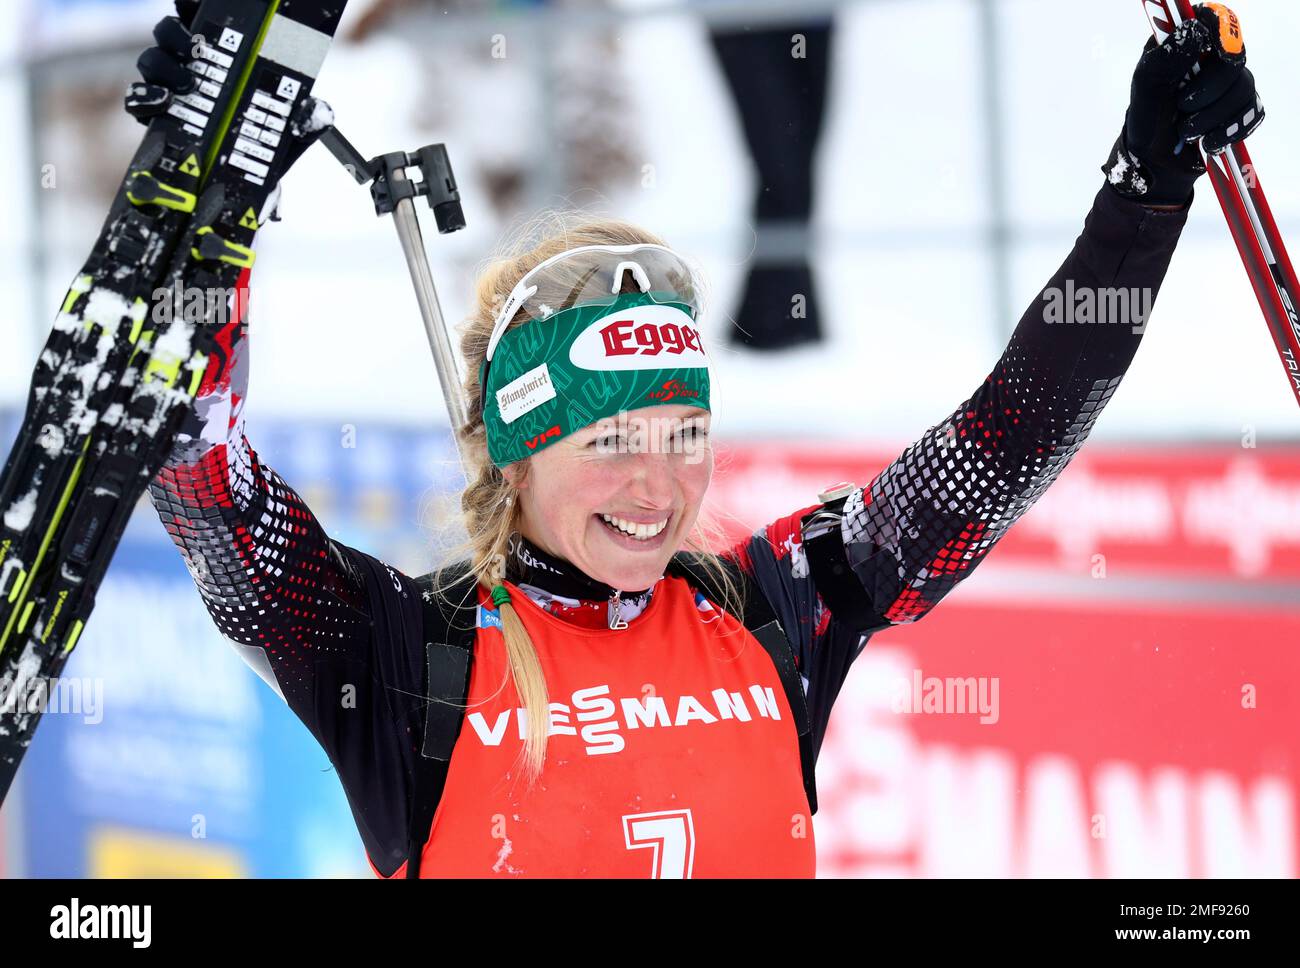 Third placed Lisa Hauser of Austria celebrates after the womens 12.5km mass start race at the Biathlon World Cup in Anterselva, Italy, Saturday, Jan